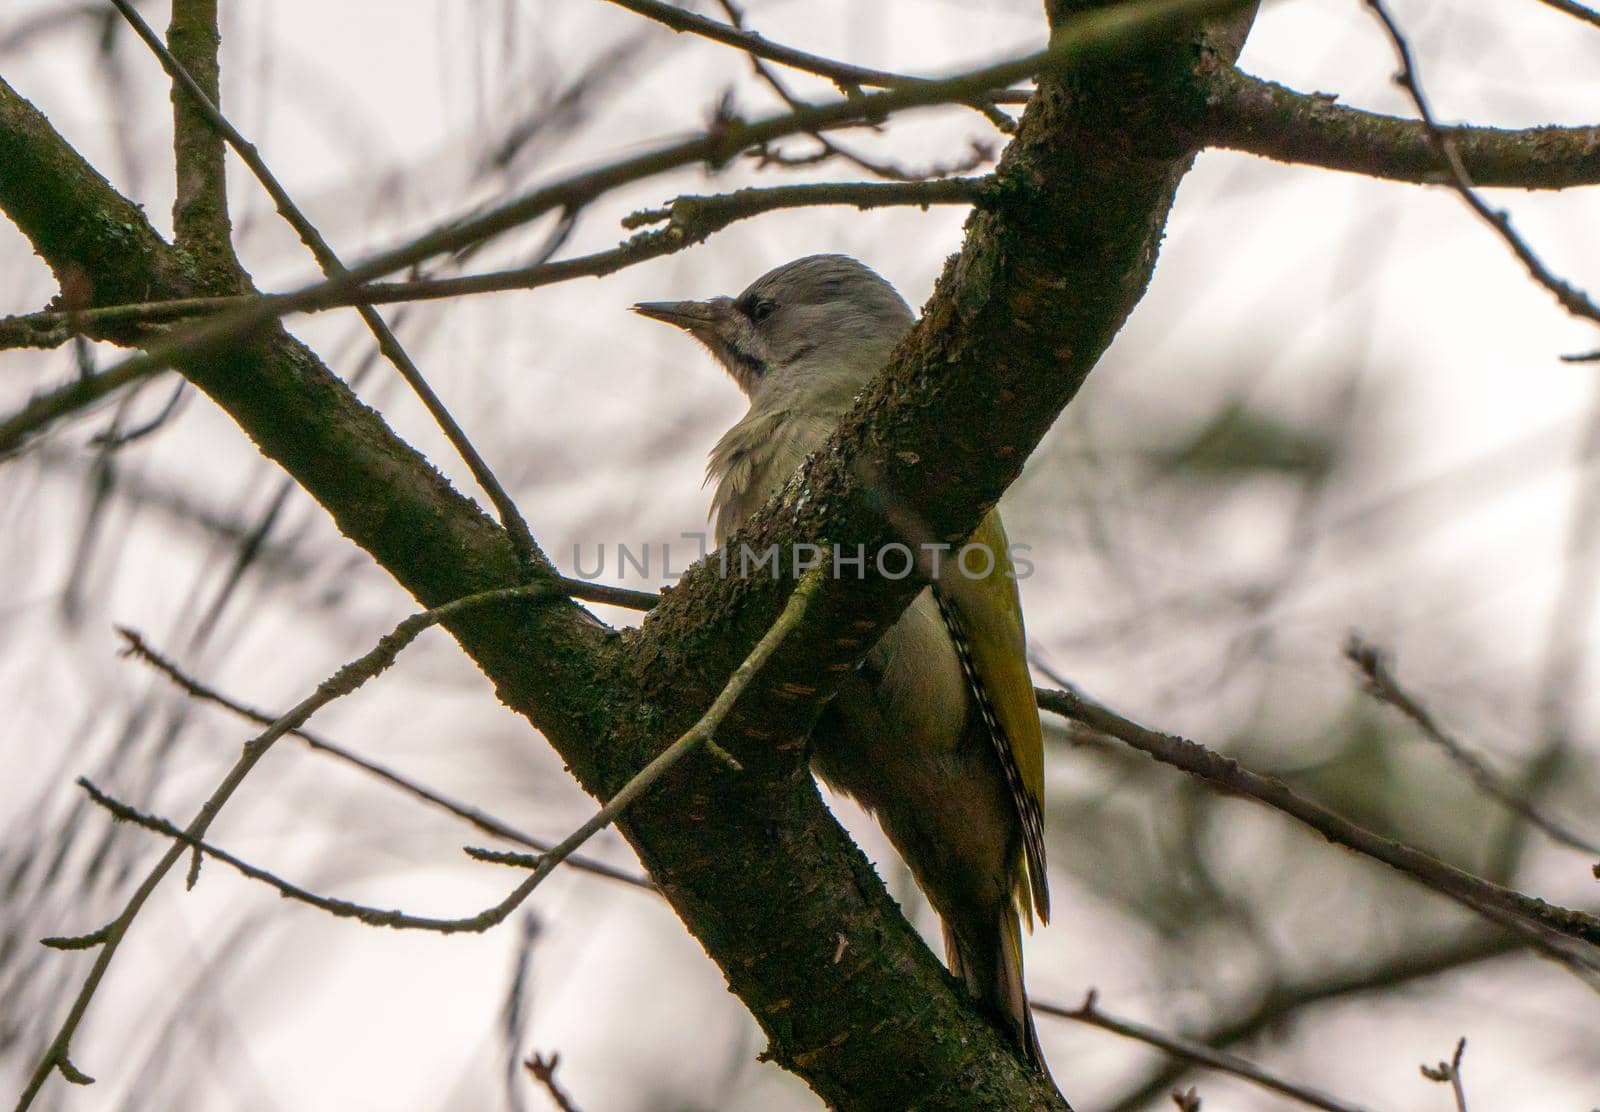 Grey-headed or grey-faced woodpecker female Picus canus by Arsgera